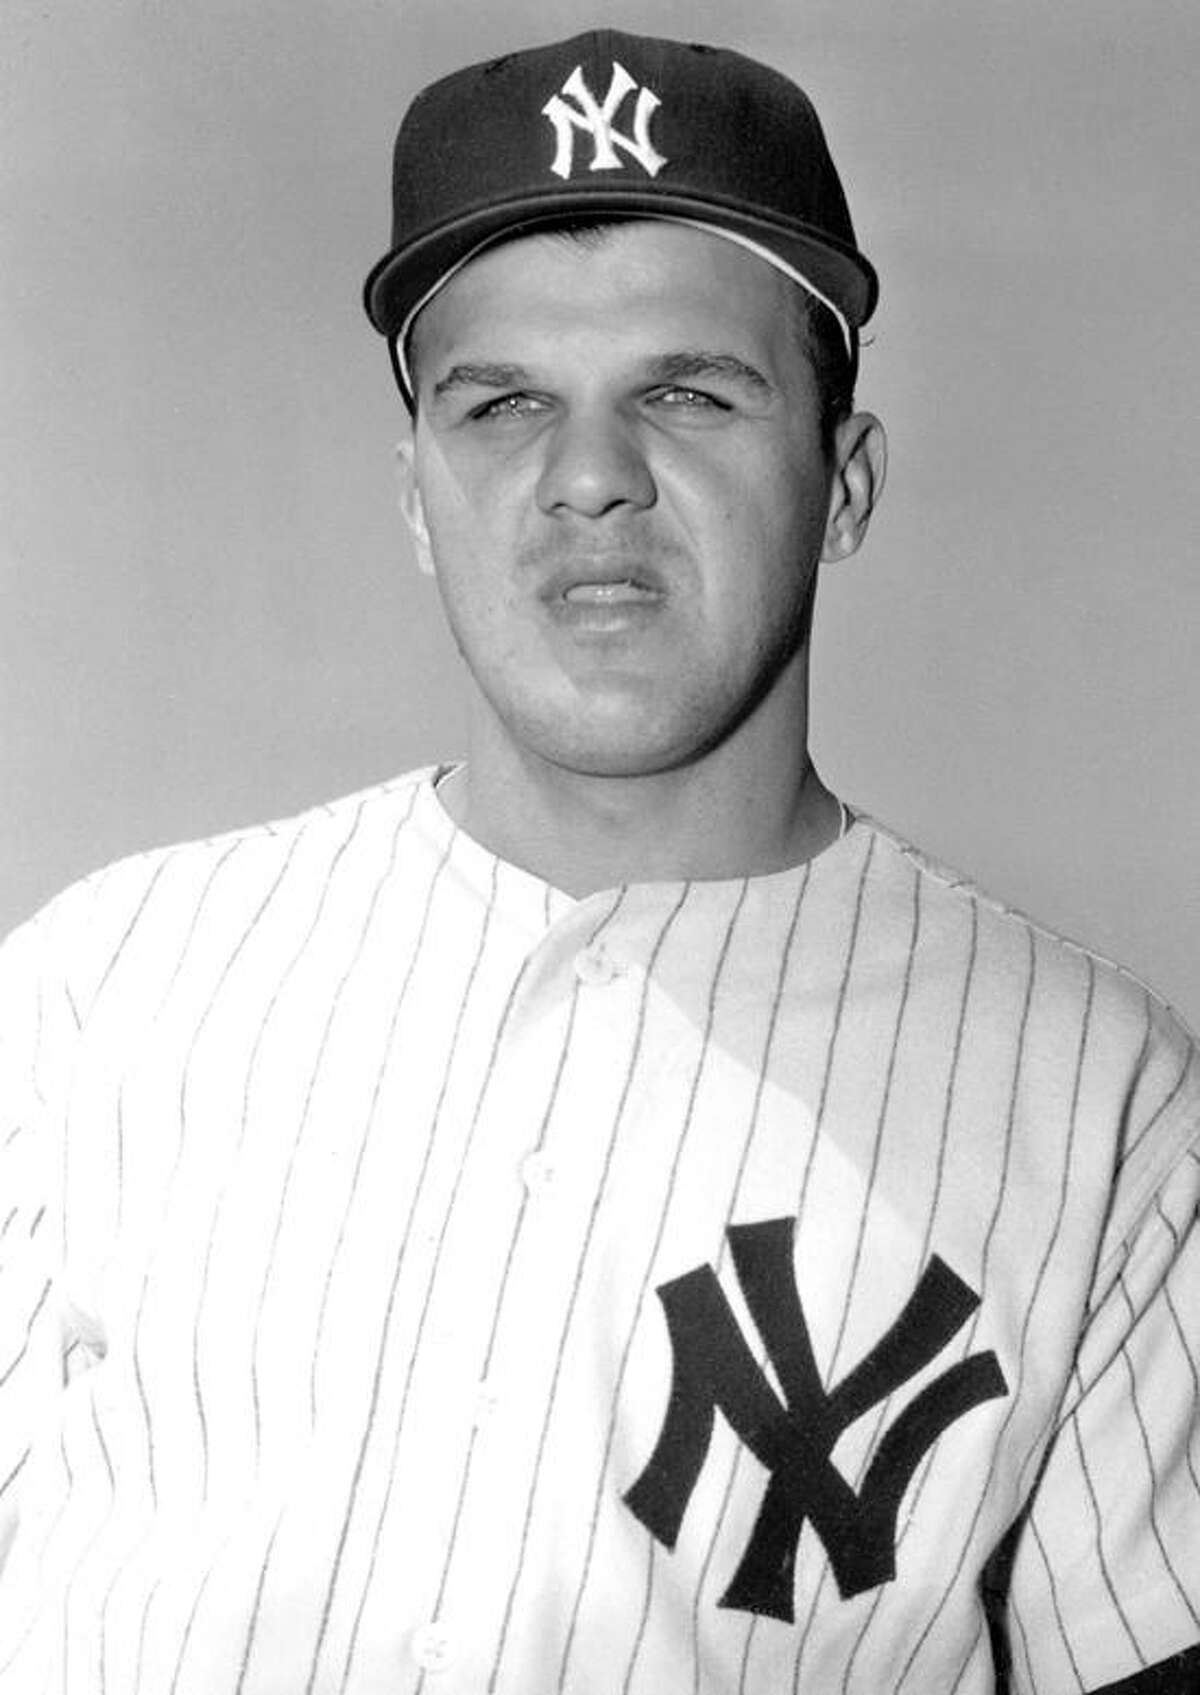 1957 World Series Game three Lew Burdette beats the Yankees - This